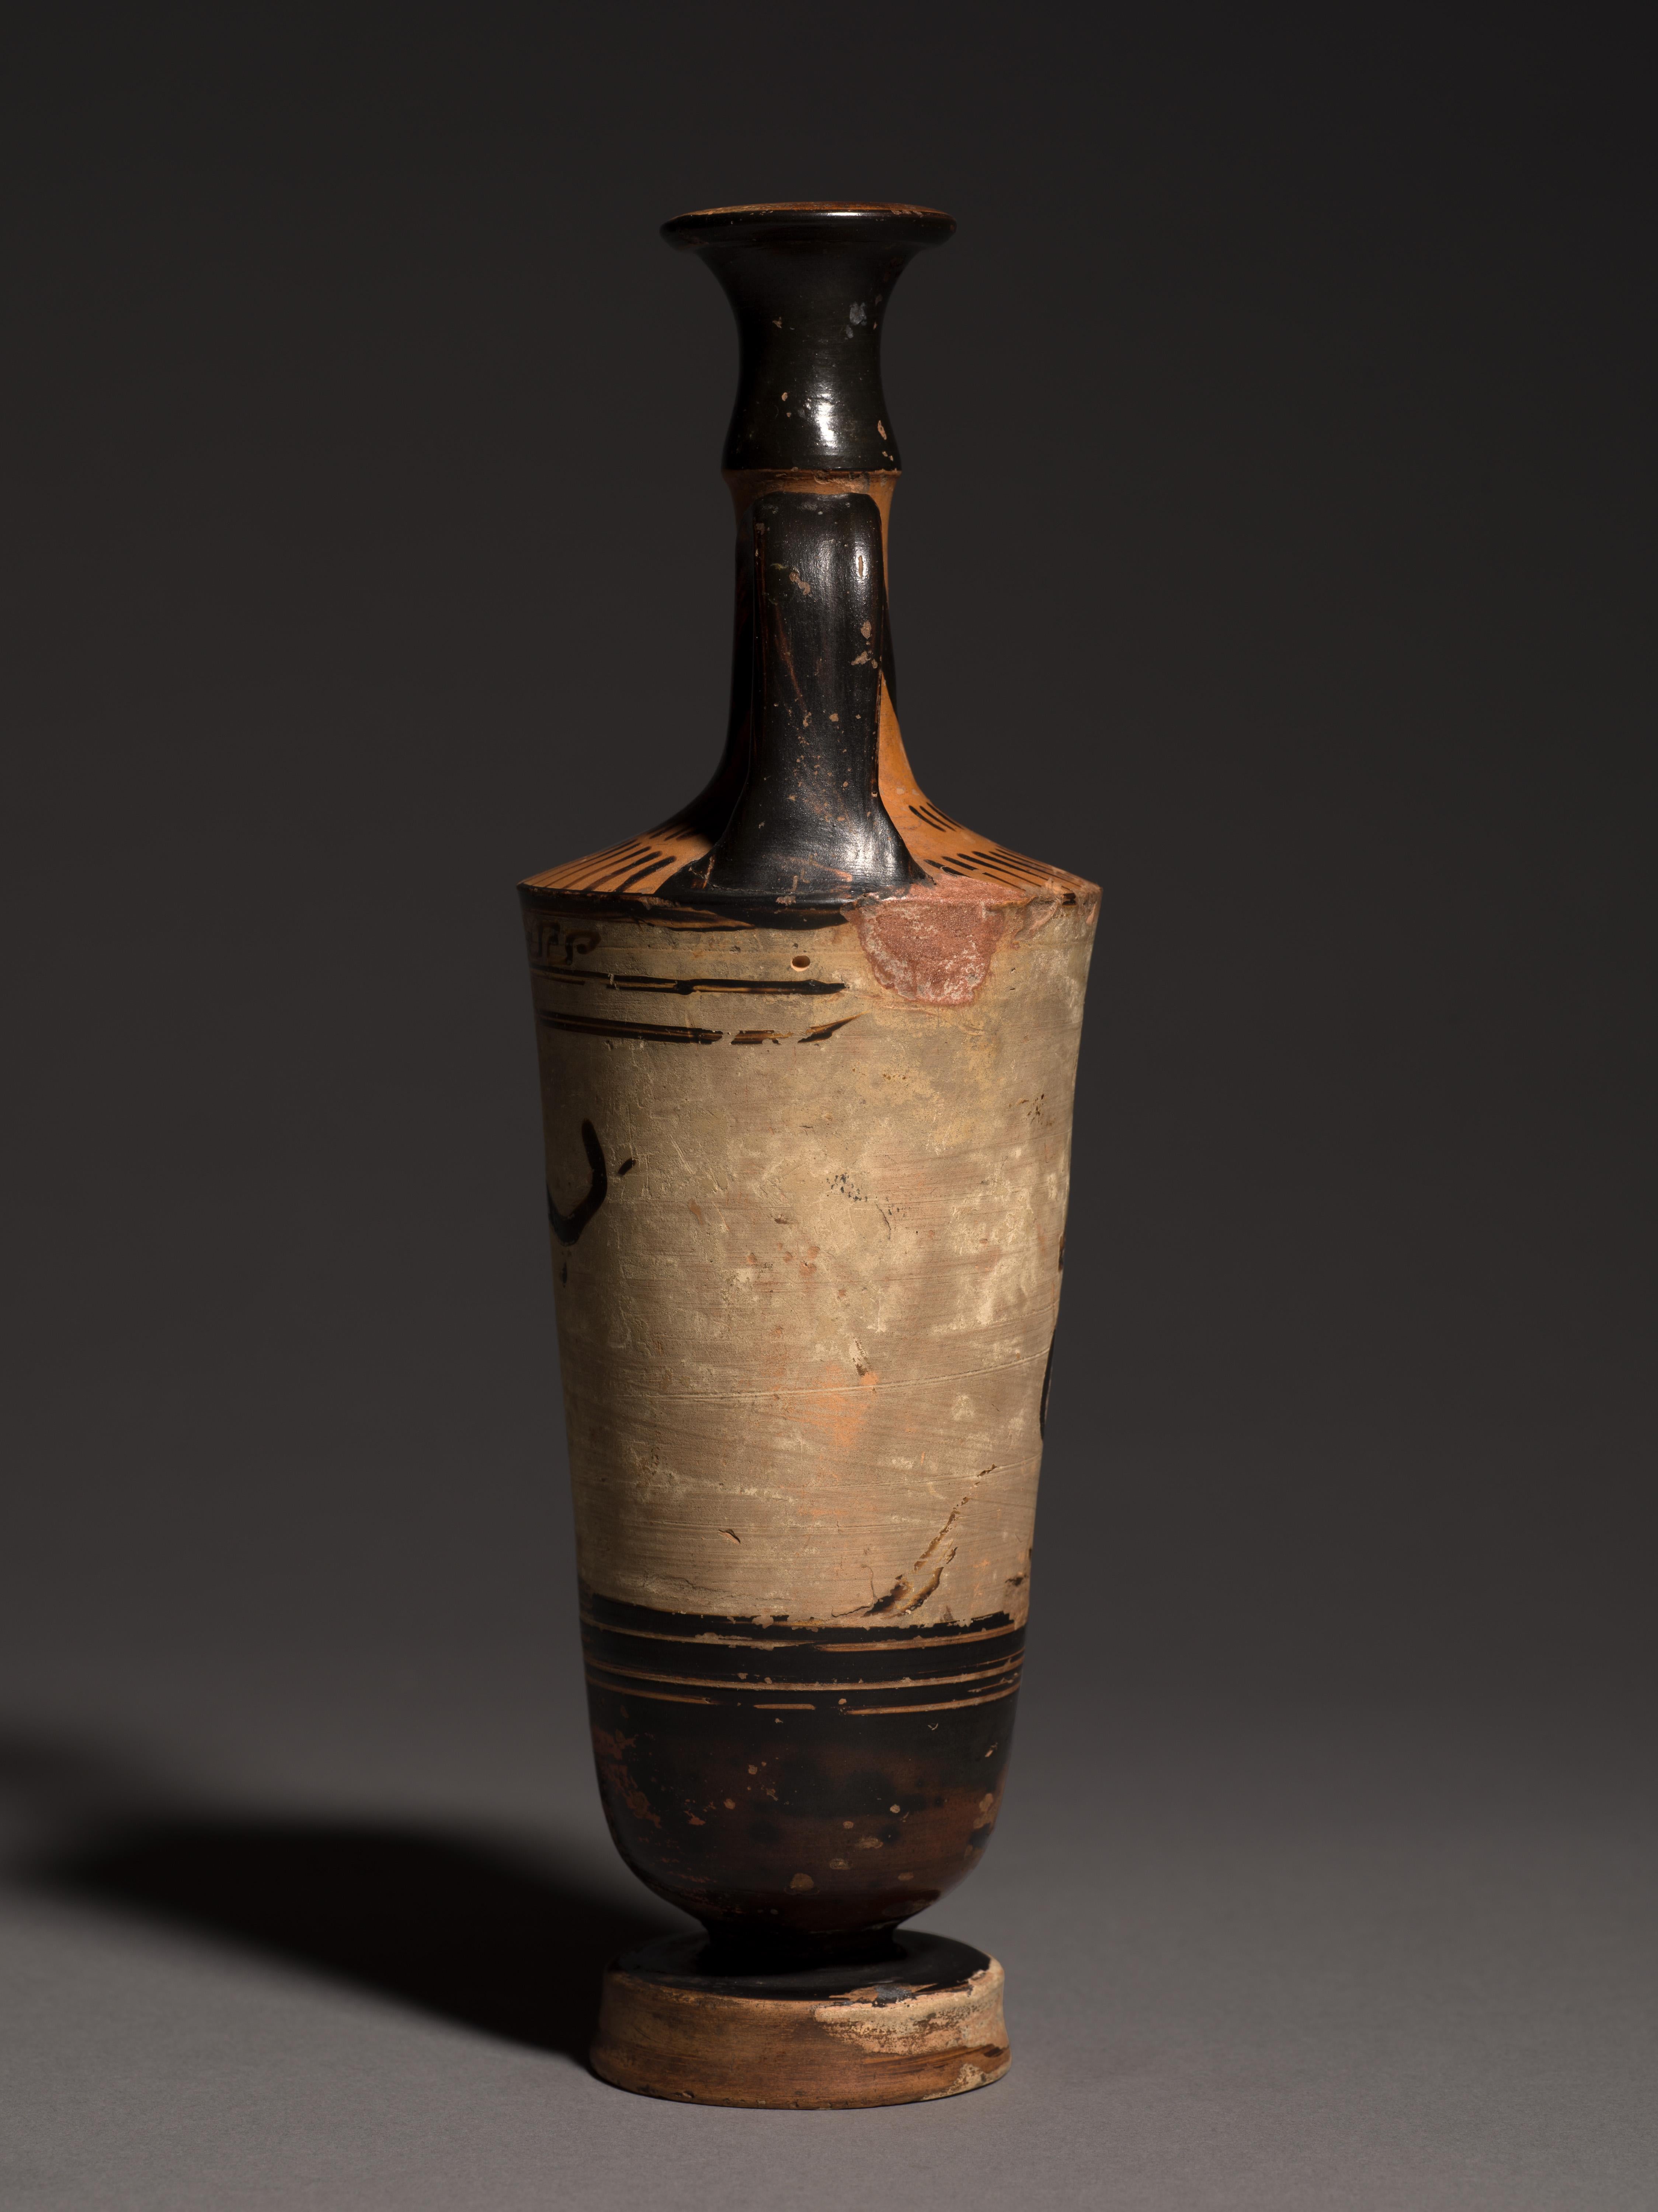 Attributed to the Beldam Painter, this attic lekythos with black figure on white background features a chimney shape. 

PROVENANCE
Emmanuel Segradakis (1890-1948) collection, Paris
Private collection, Oxford
Private collection, London, acquired